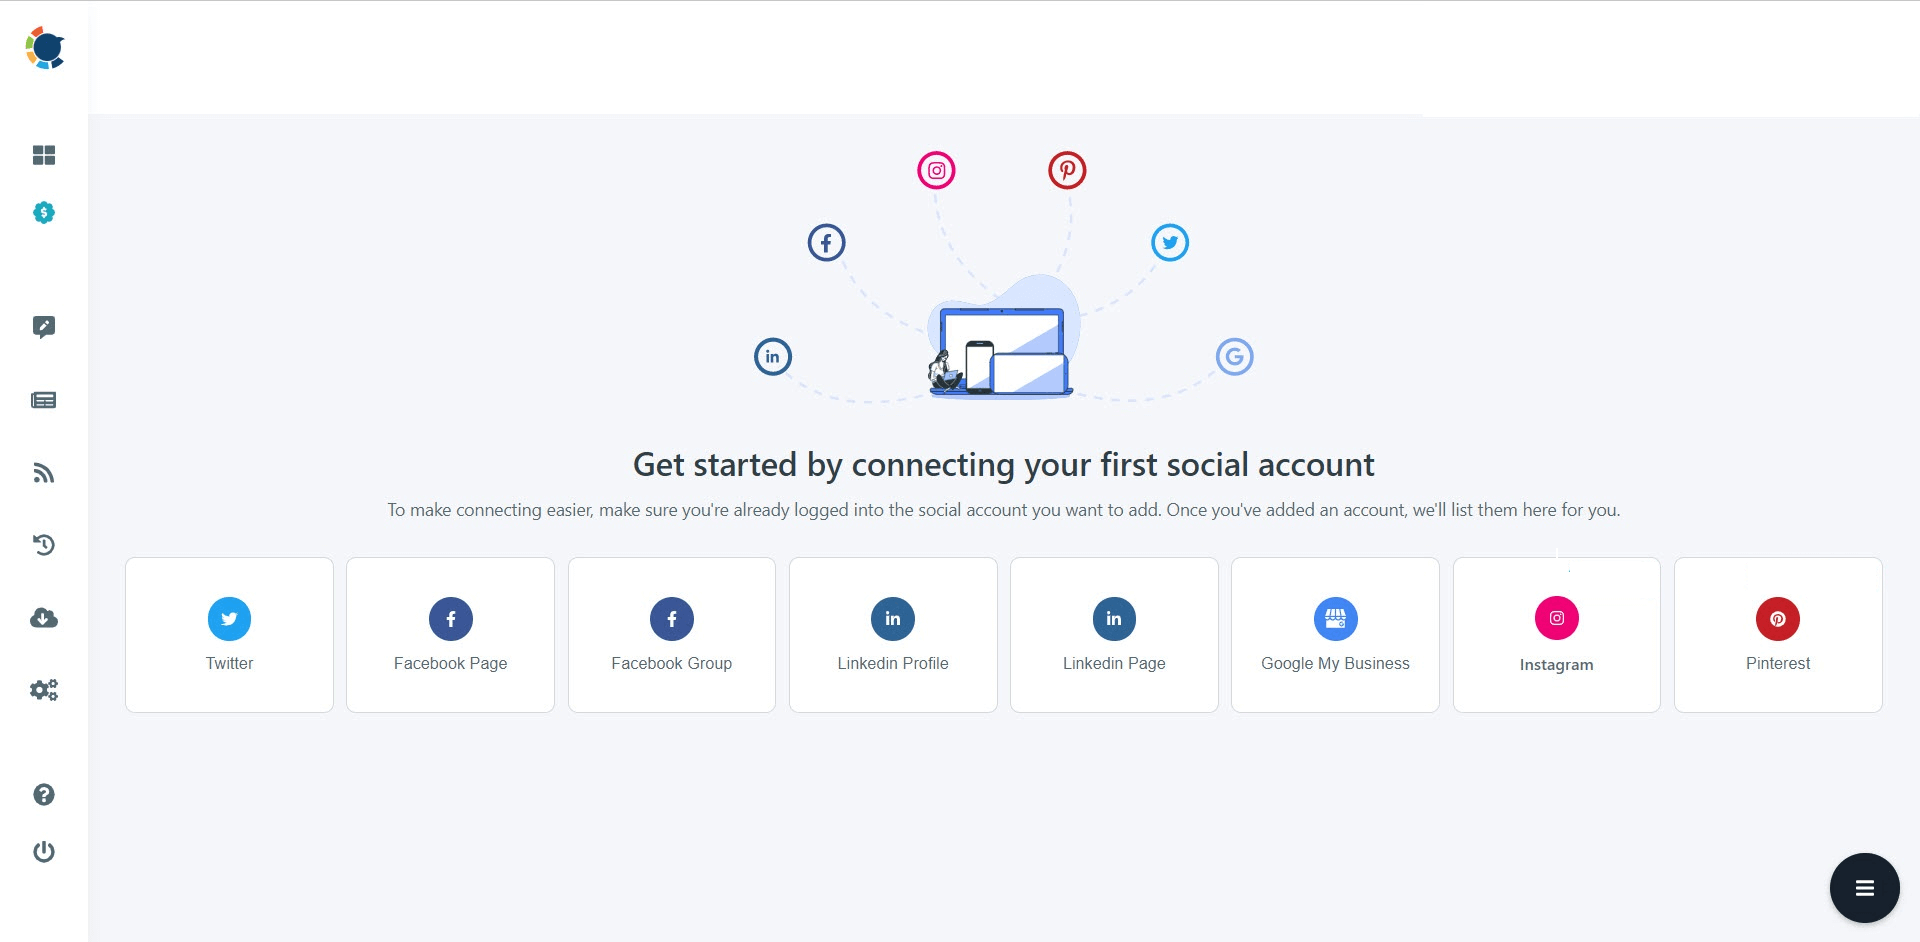 Circleboom supports Twitter, Facebook, Instagram, Pinterest, Facebook, and Google Business Profile.